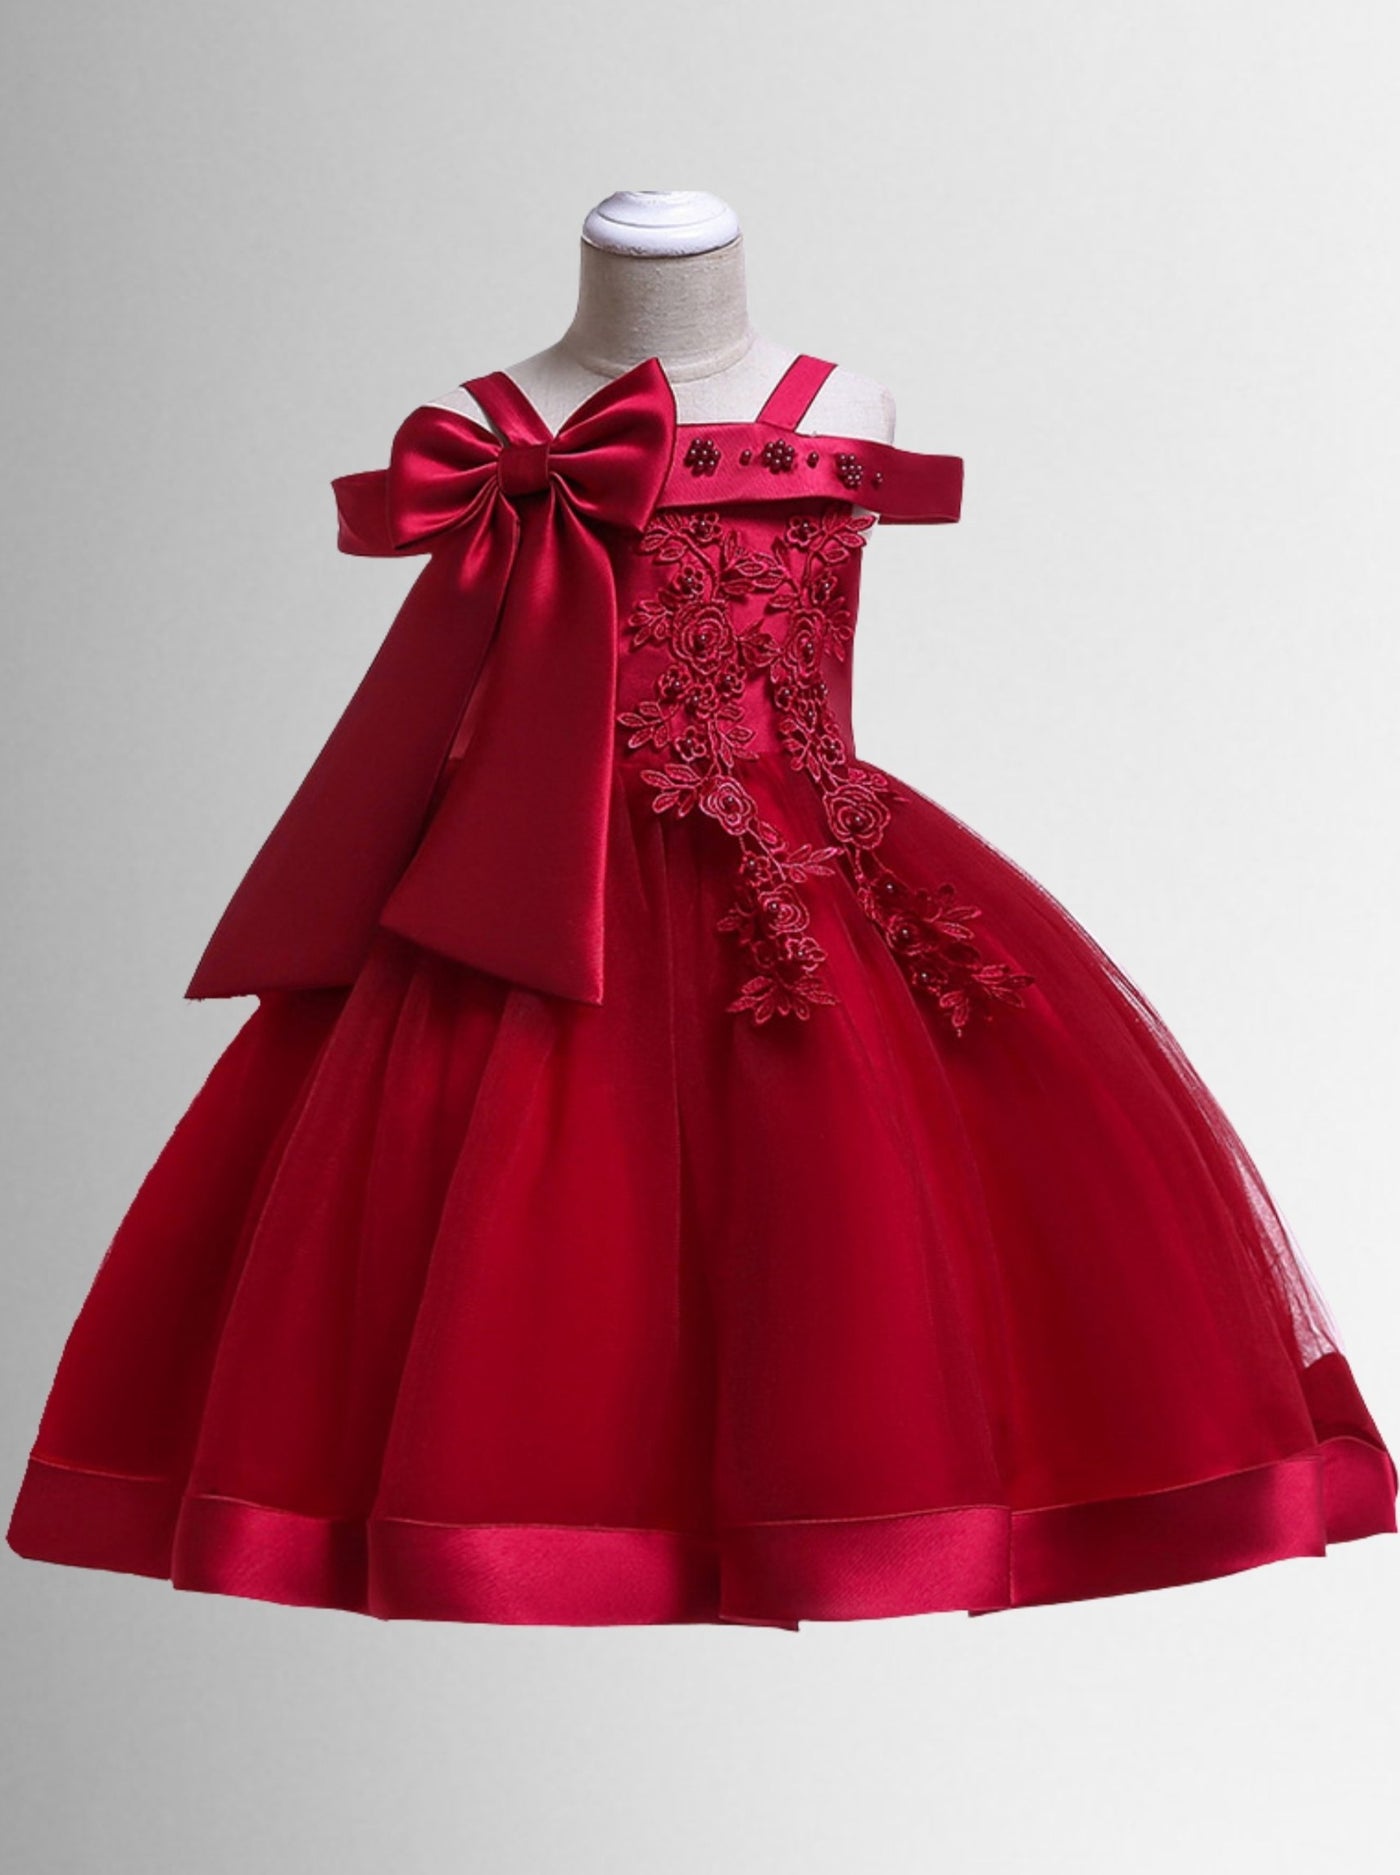 Girls Formal Dresses | Floral Embroidered Bow Holiday Party Dress